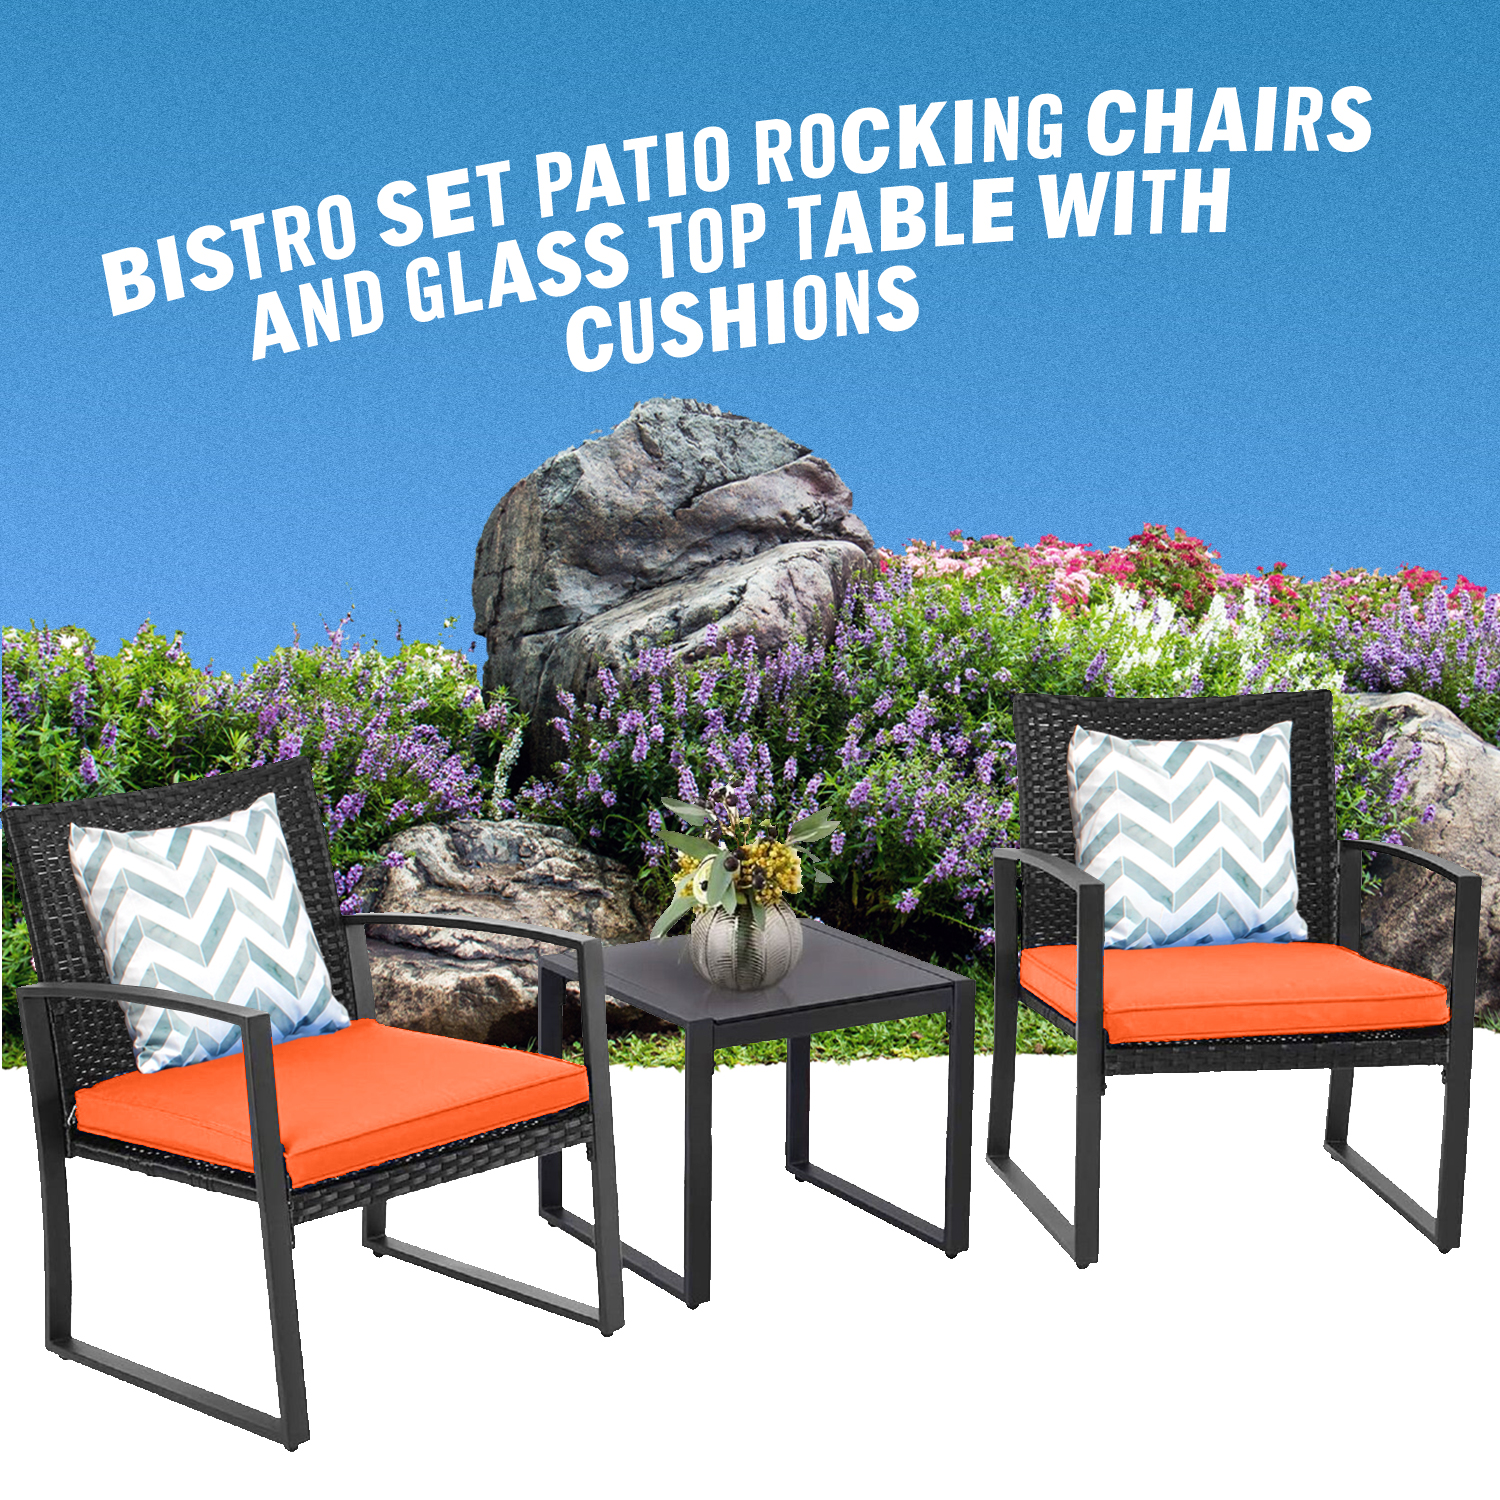 3 Pieces outfitter Wicker Patio Furniture Sets Modern Bistro Set Rattan Chair Conversation Sets with Yard and Bistro Coffee Table - image 4 of 8